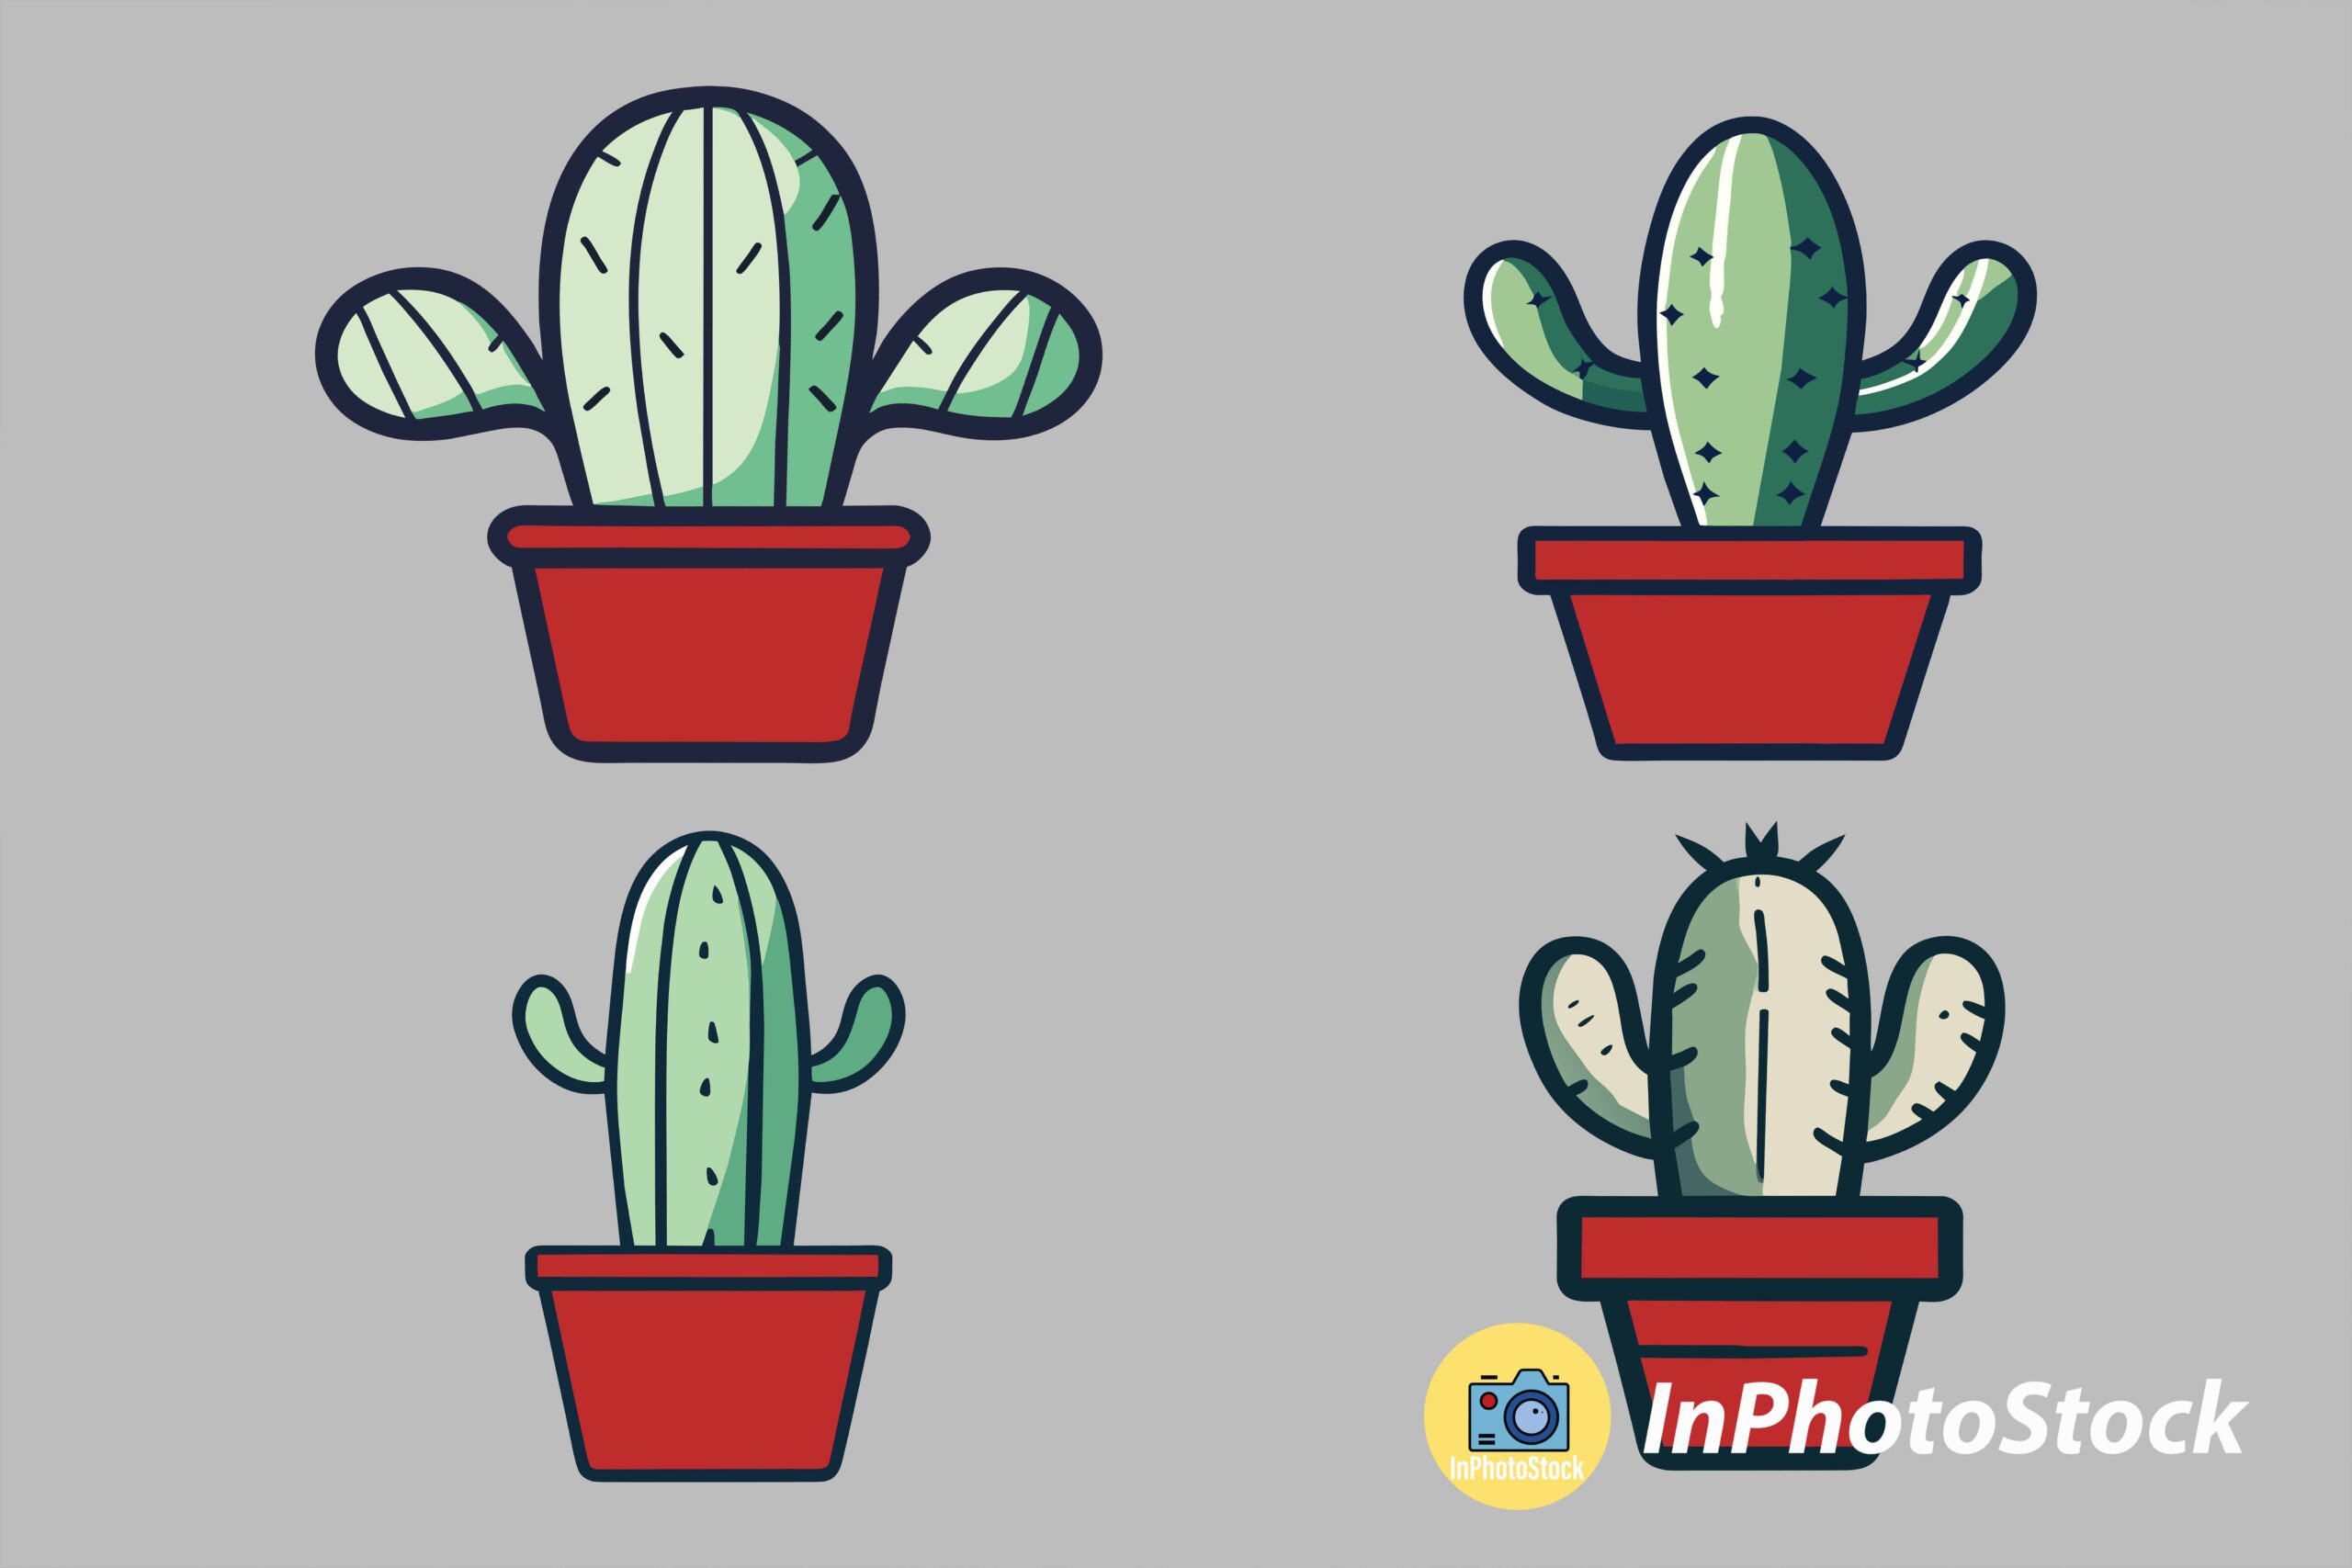 How to Use Cactus Vector Graphics